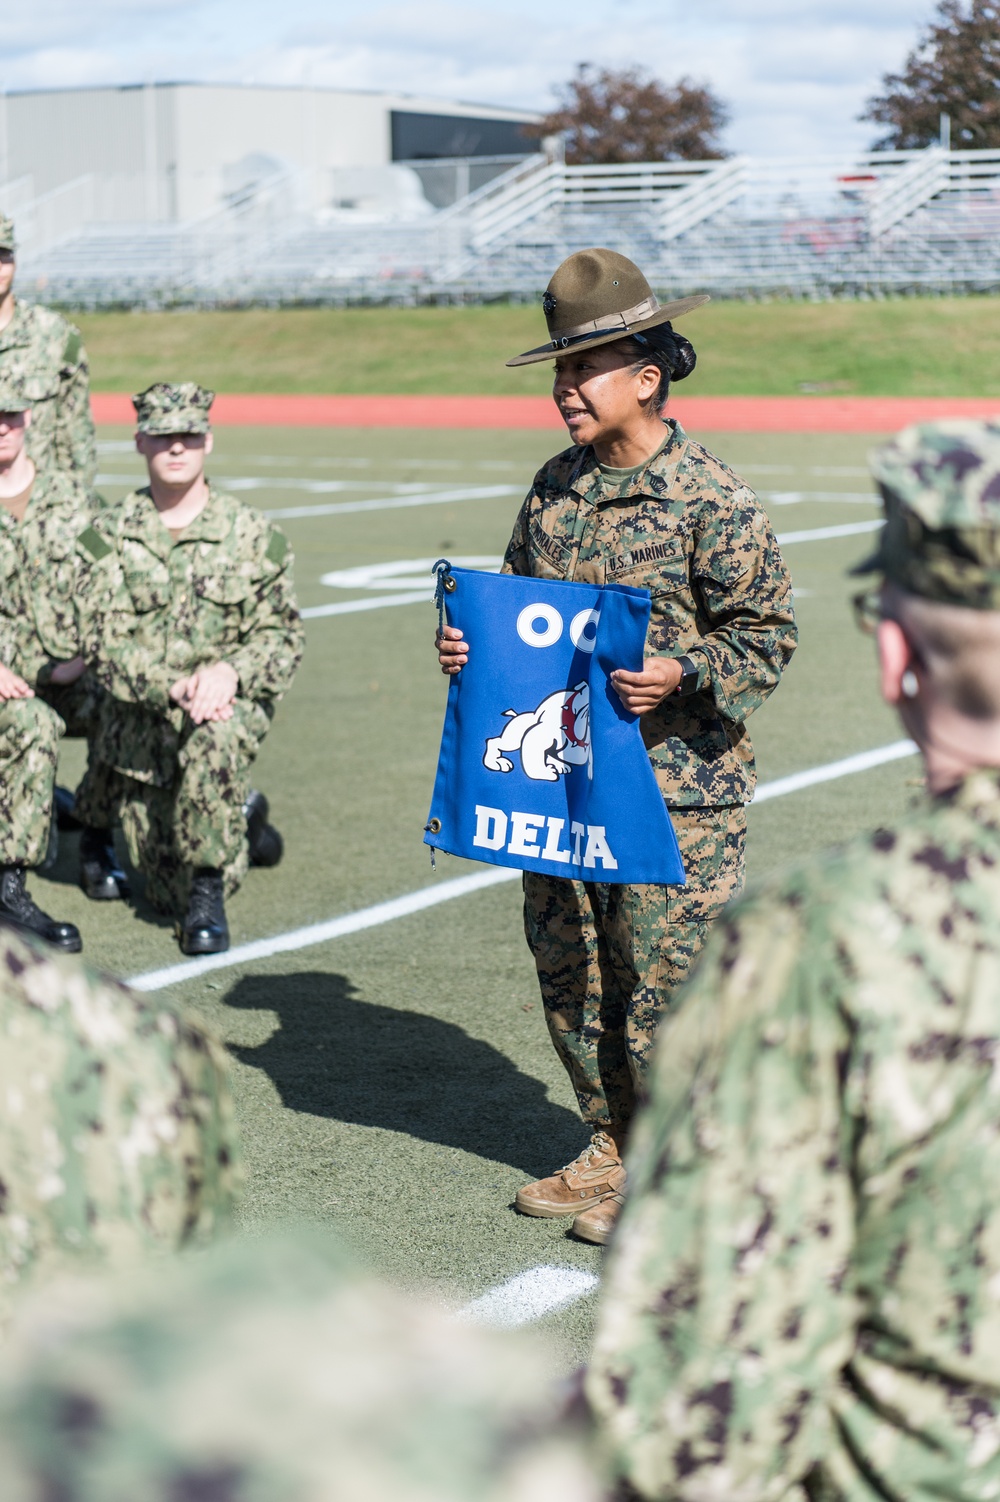 191018-N-TE695-0013 NEWPORT, R.I. (Oct. 18, 2019) -- Navy Officer Candidate School reach a milestone as junior officer candidates